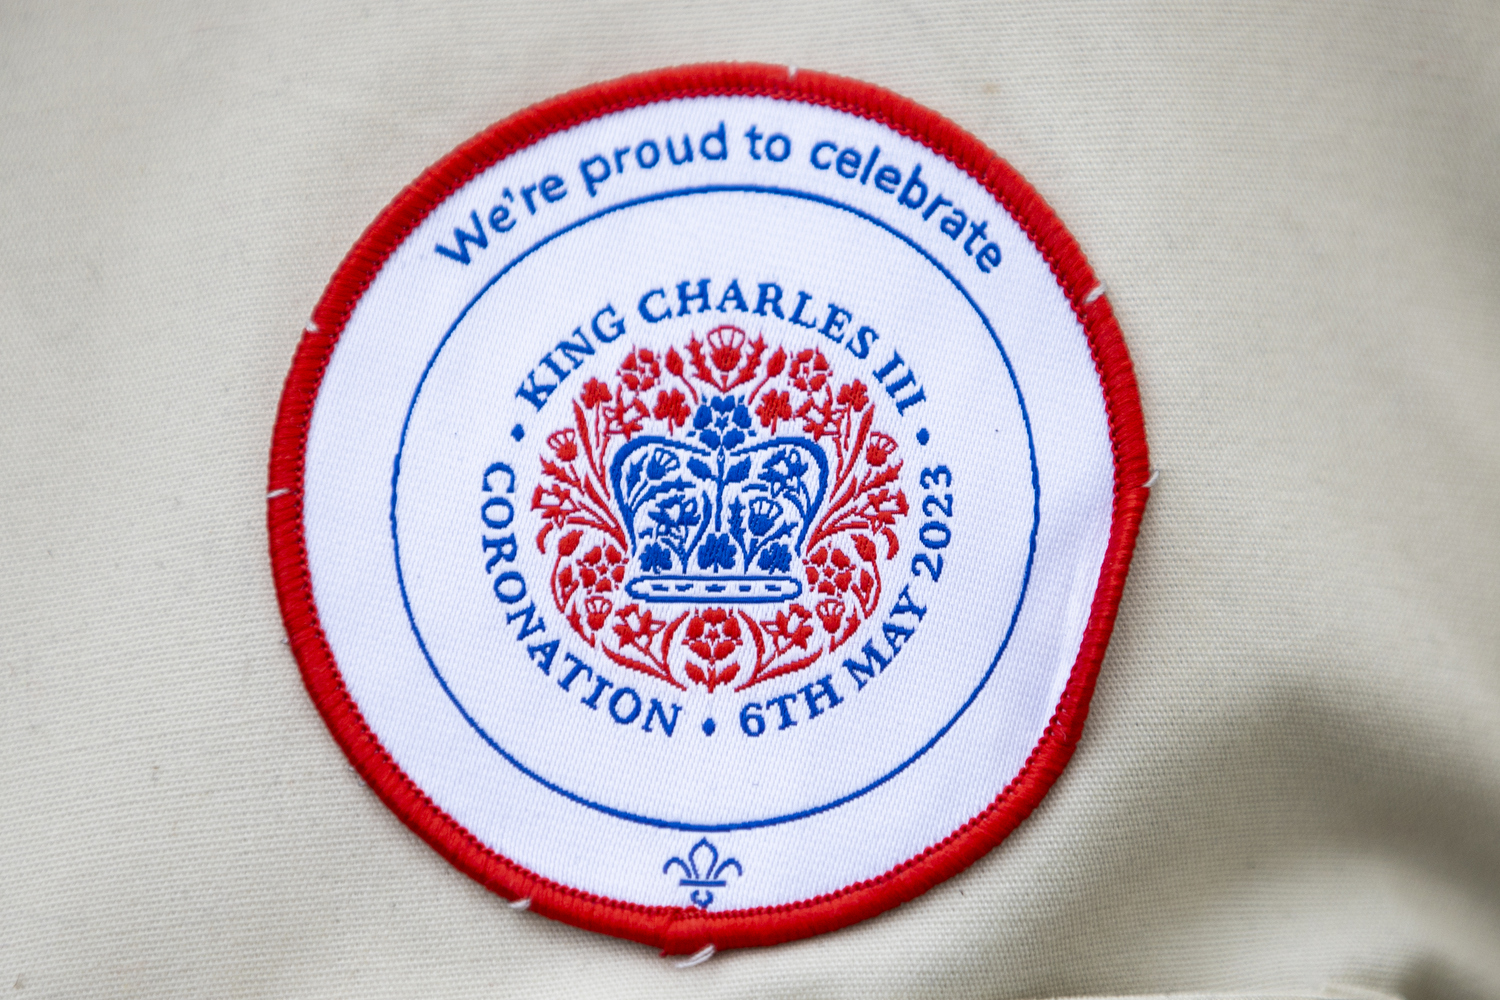 An occasional badge celebrating the coronation 